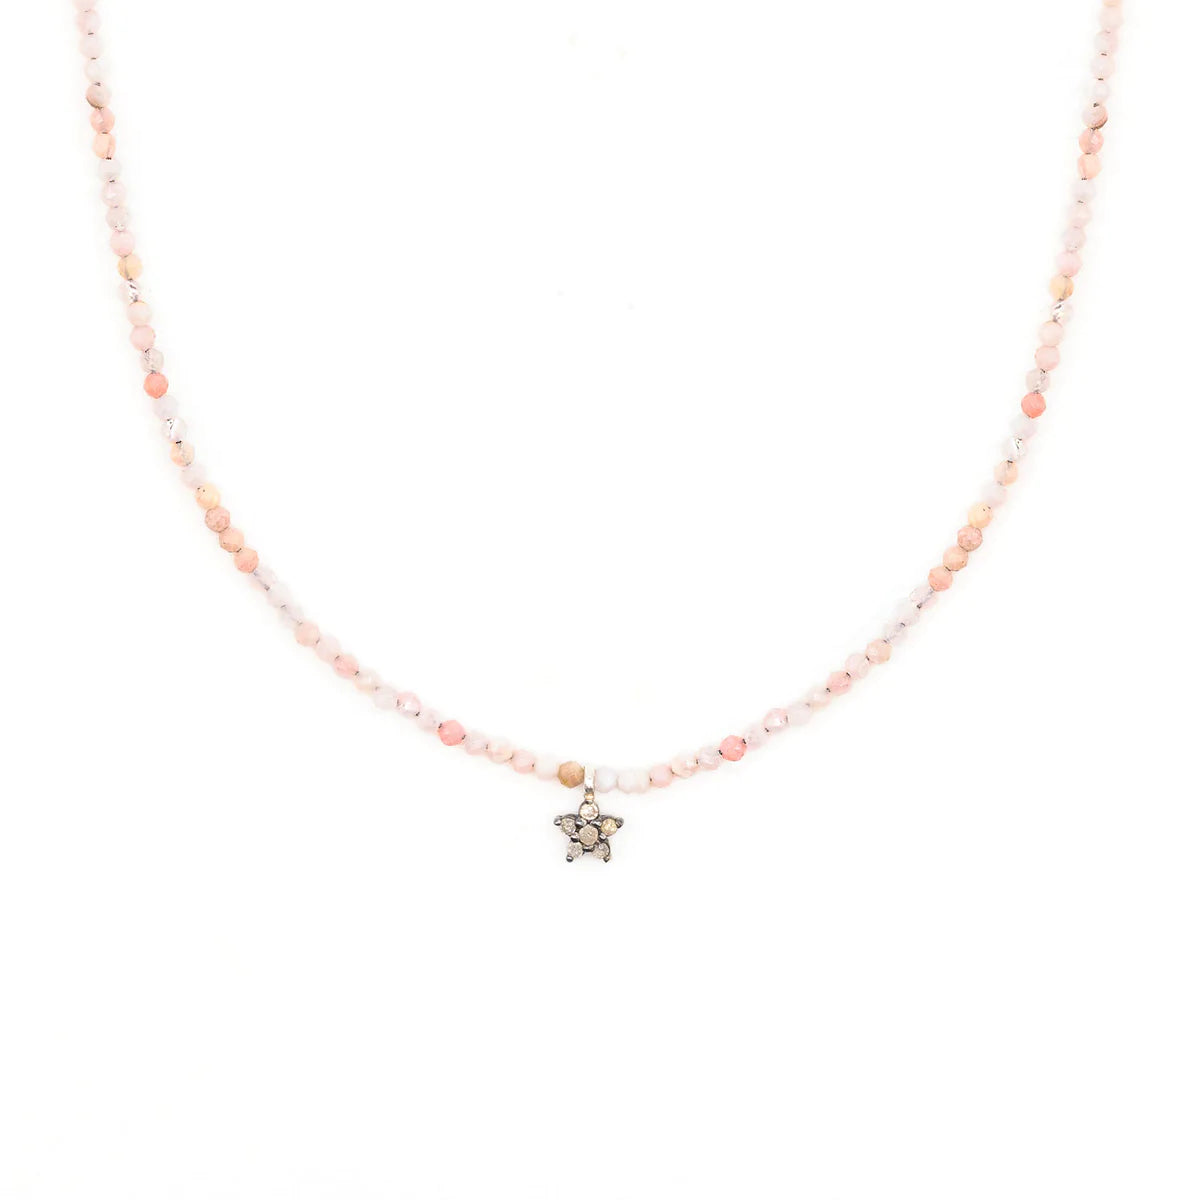 pink-opal-bead-necklace-product-shot_1200x.webp__PID:1351ede6-c5f8-49c7-95ae-9a1f7cdbdad1